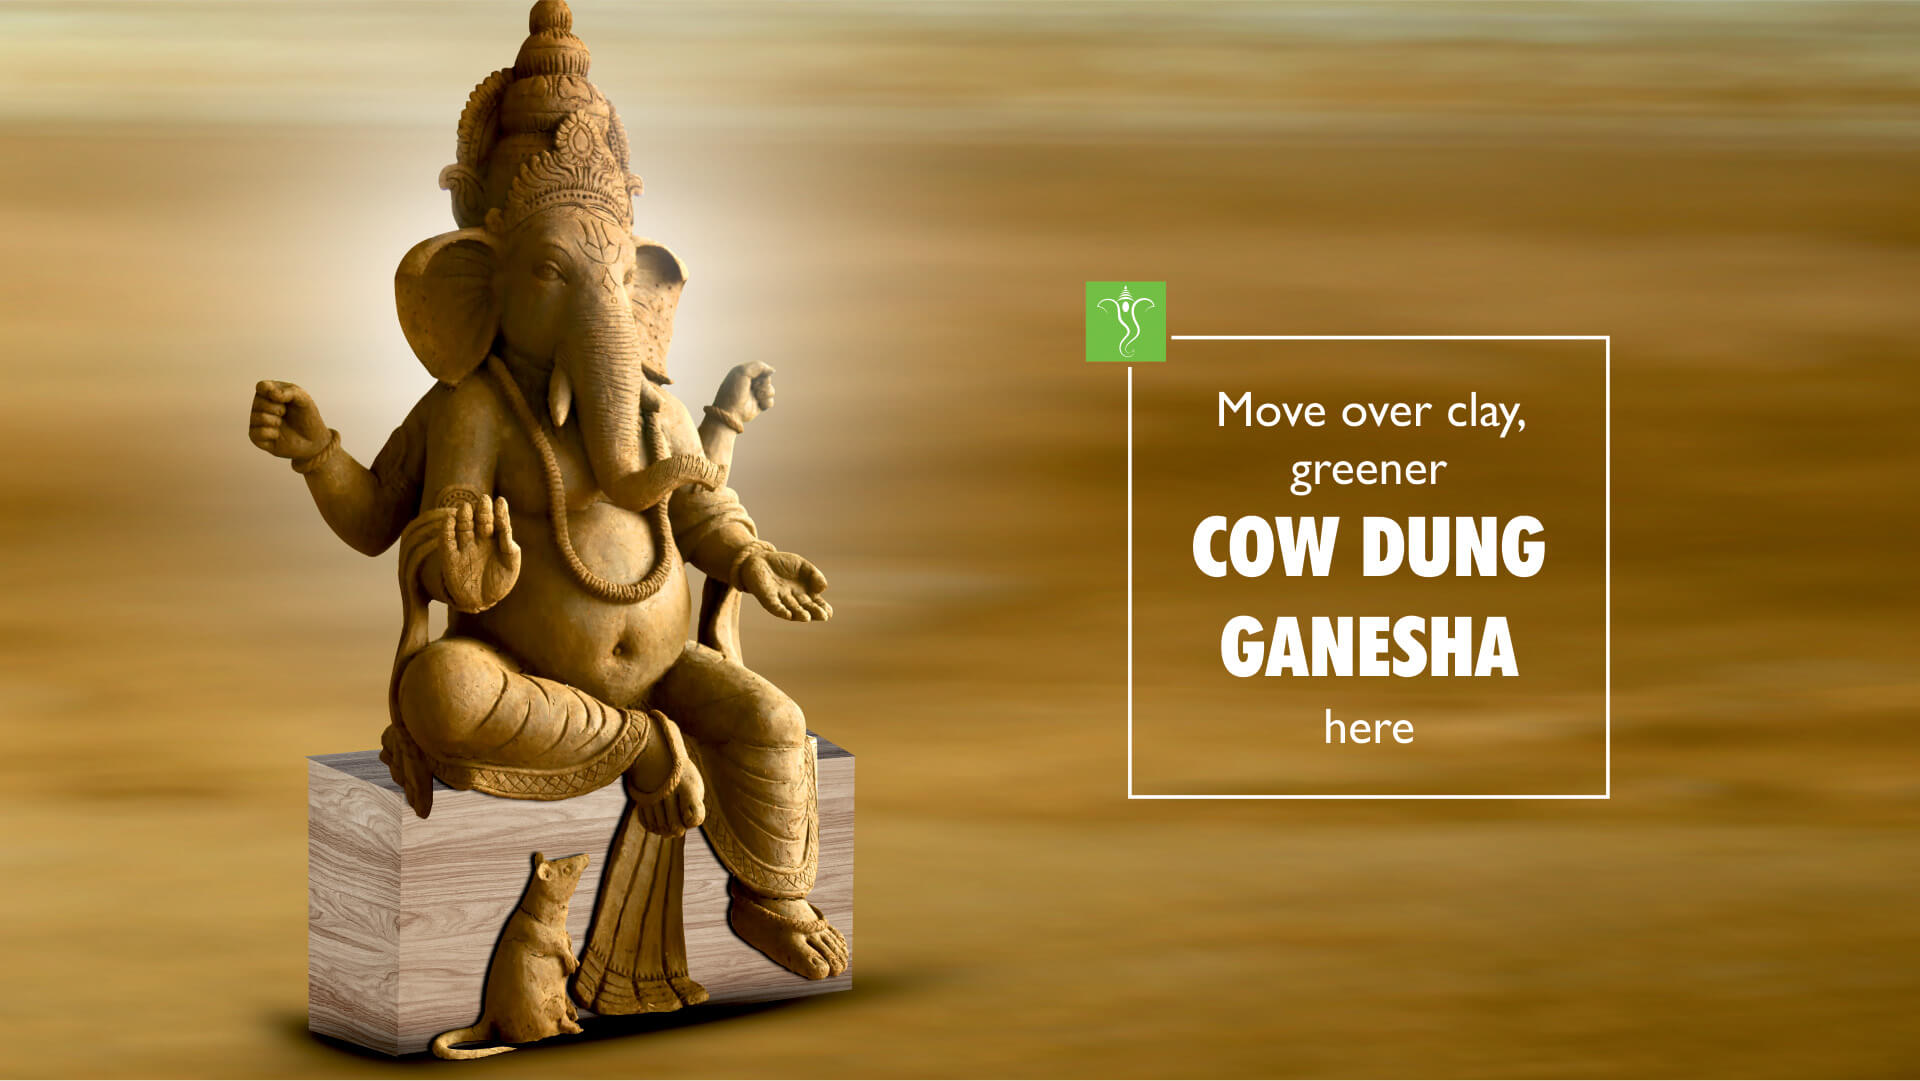 Klimom- Indian Holy cow dung cakes for Ganesh Chaturthi